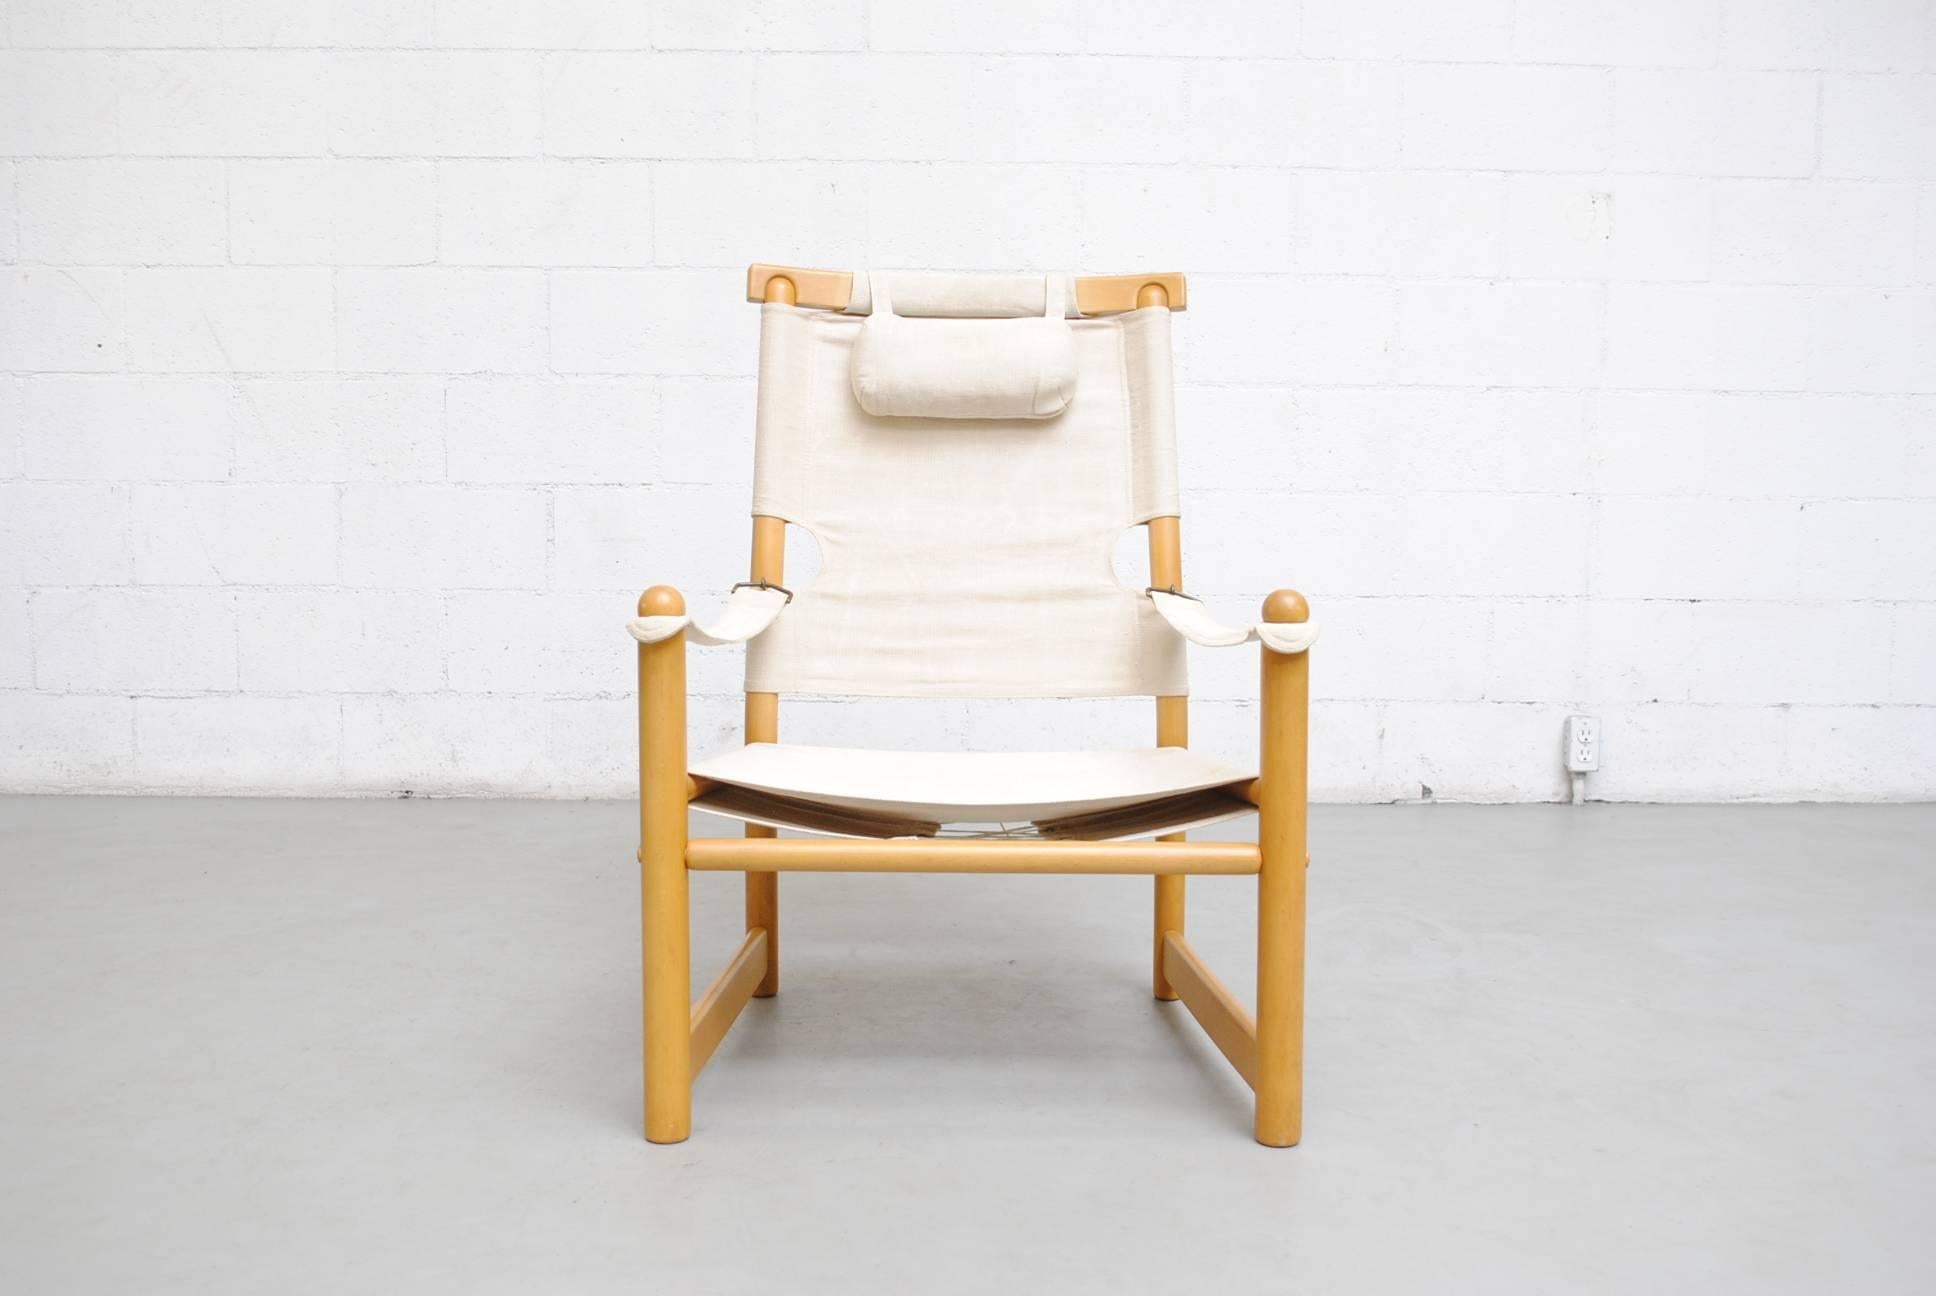 Canvas Safair Campaign chair with natural wood frame and canvas seat. In original condition.